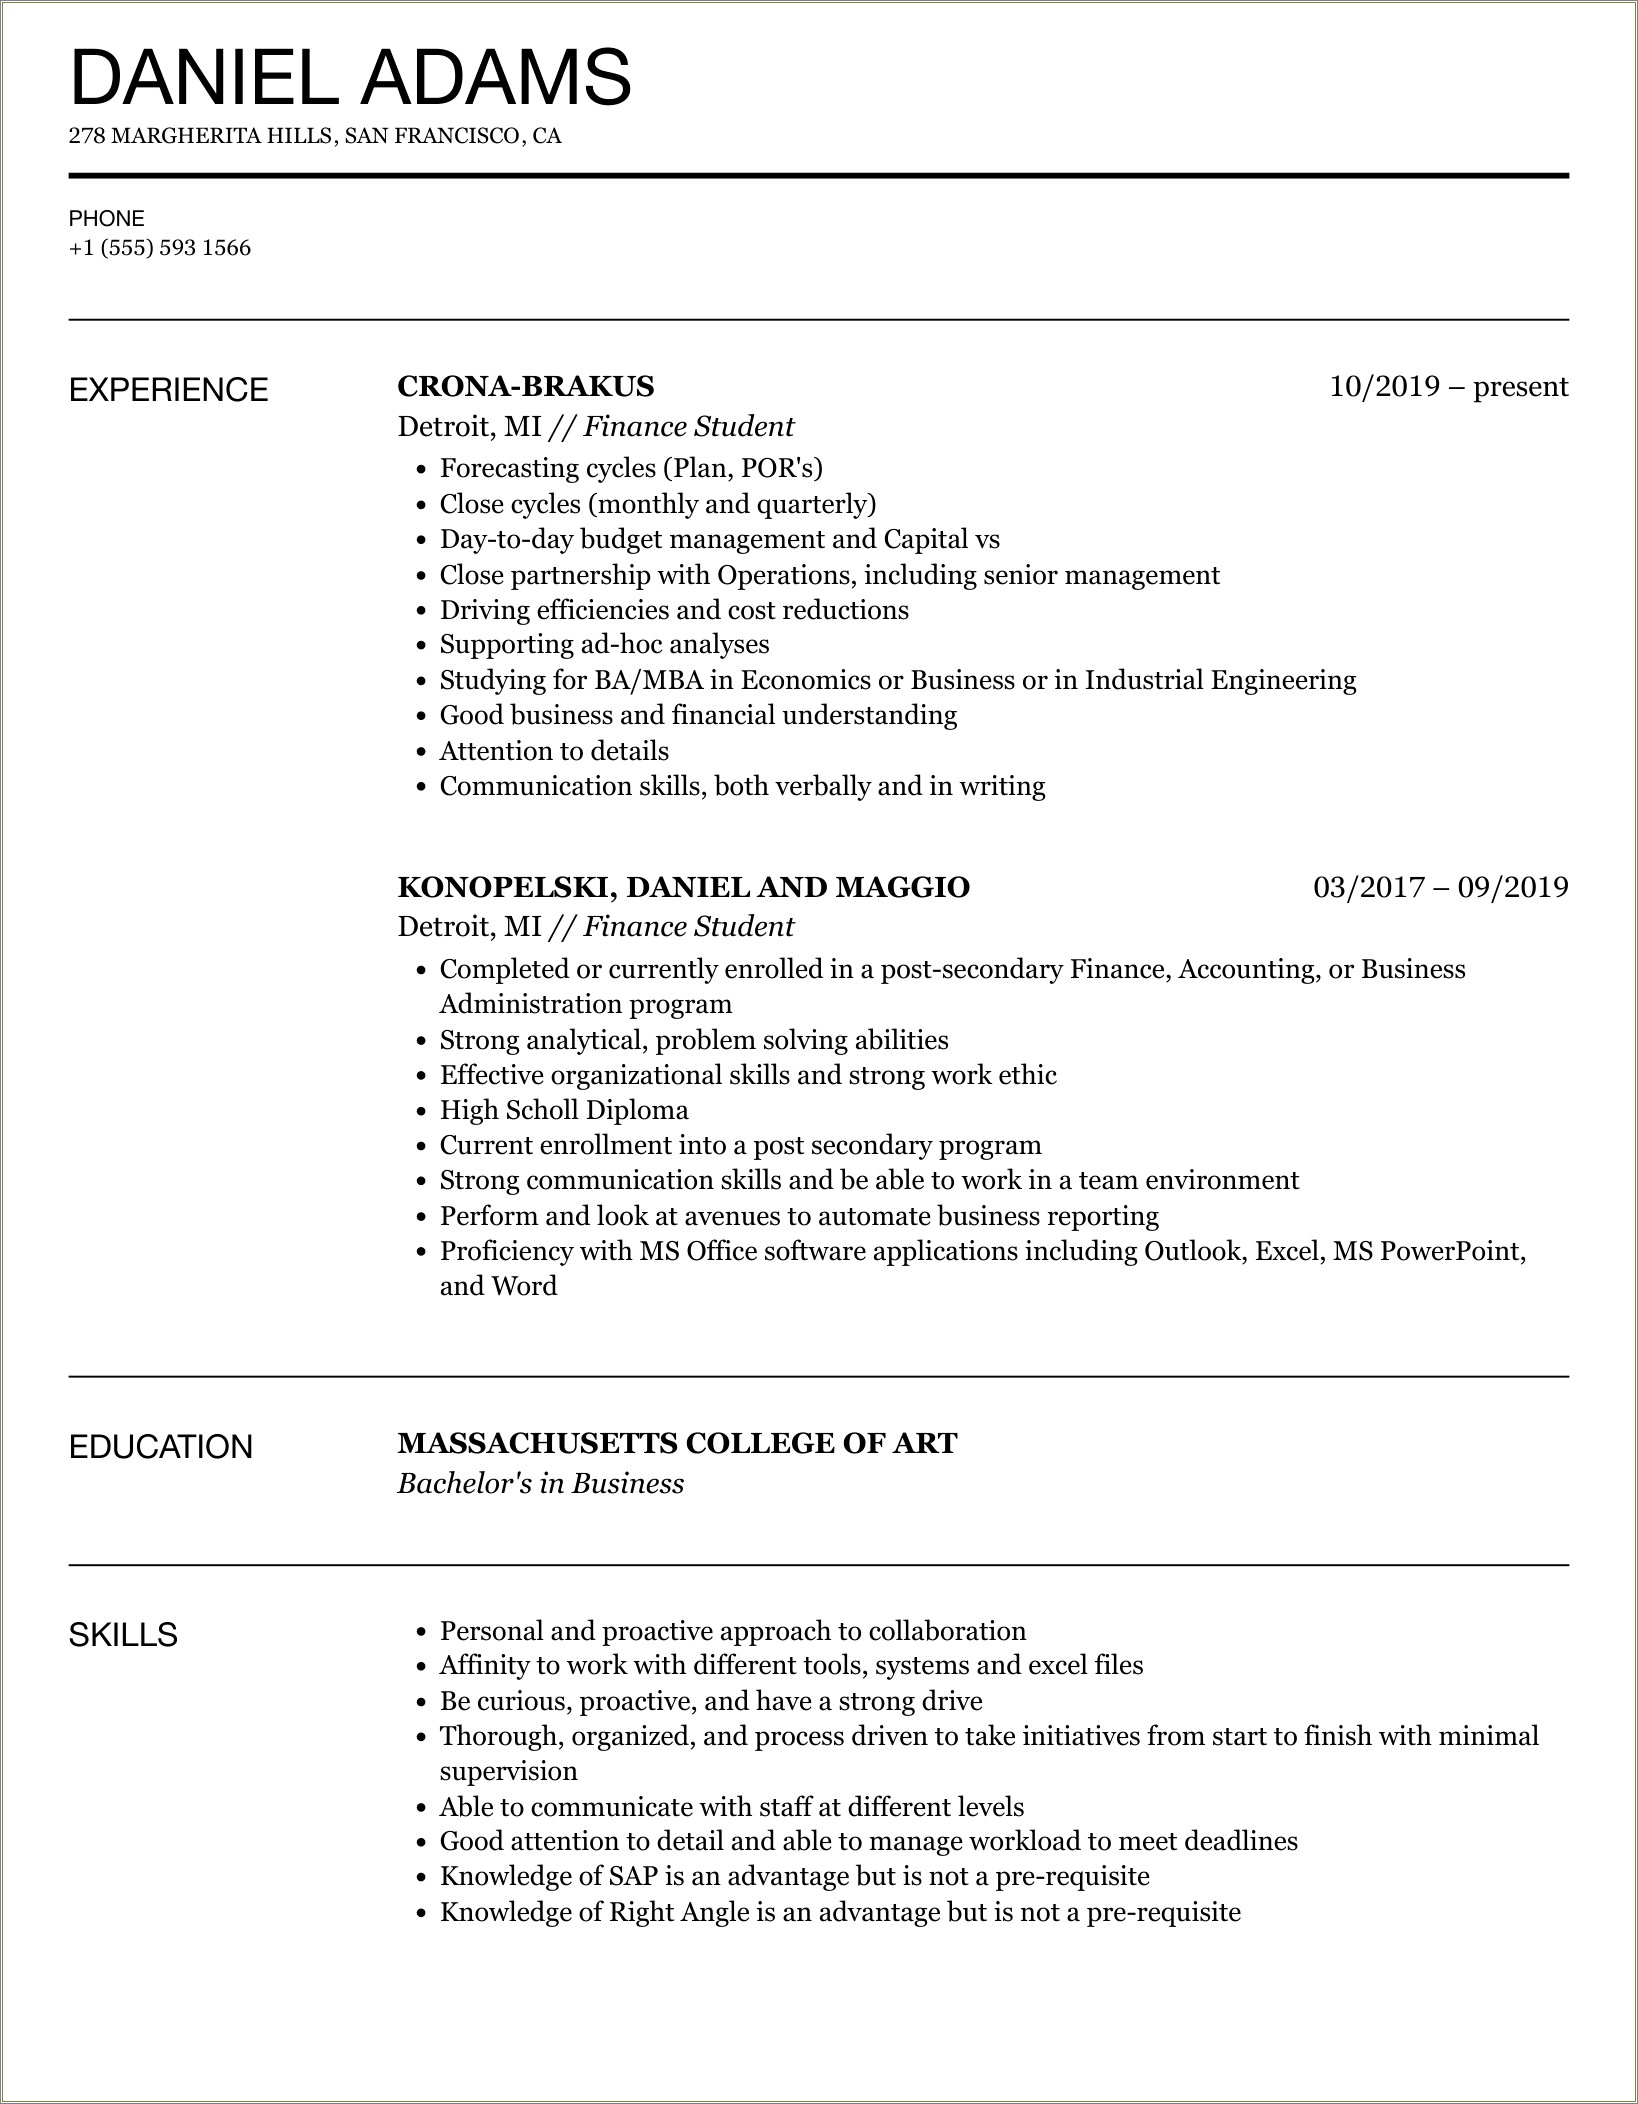 Sample Resume With A Personal Statement